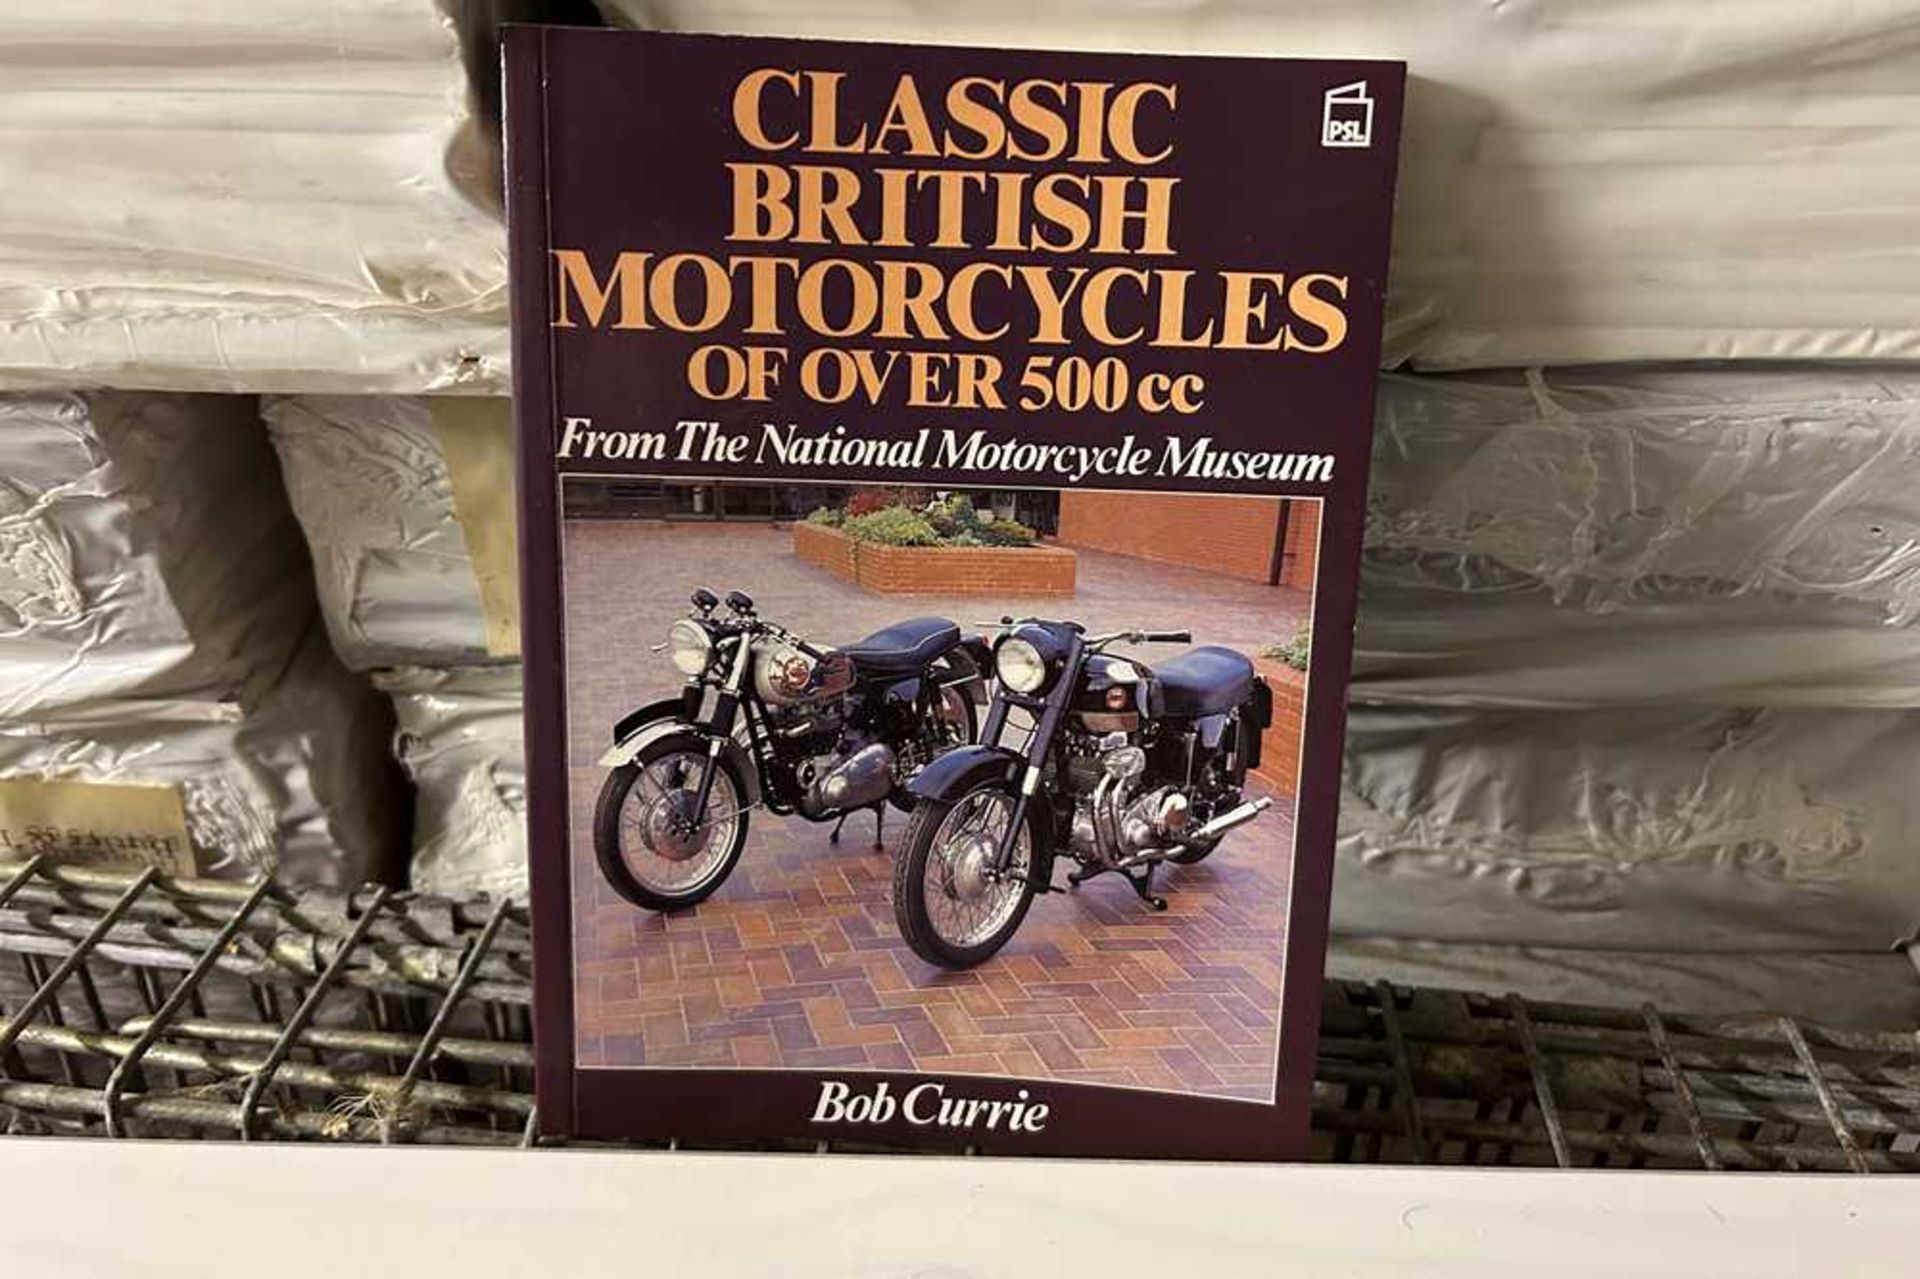 50 Packs of the Book - 'Classic British Motorcycles Over 500cc' by Bob Currie